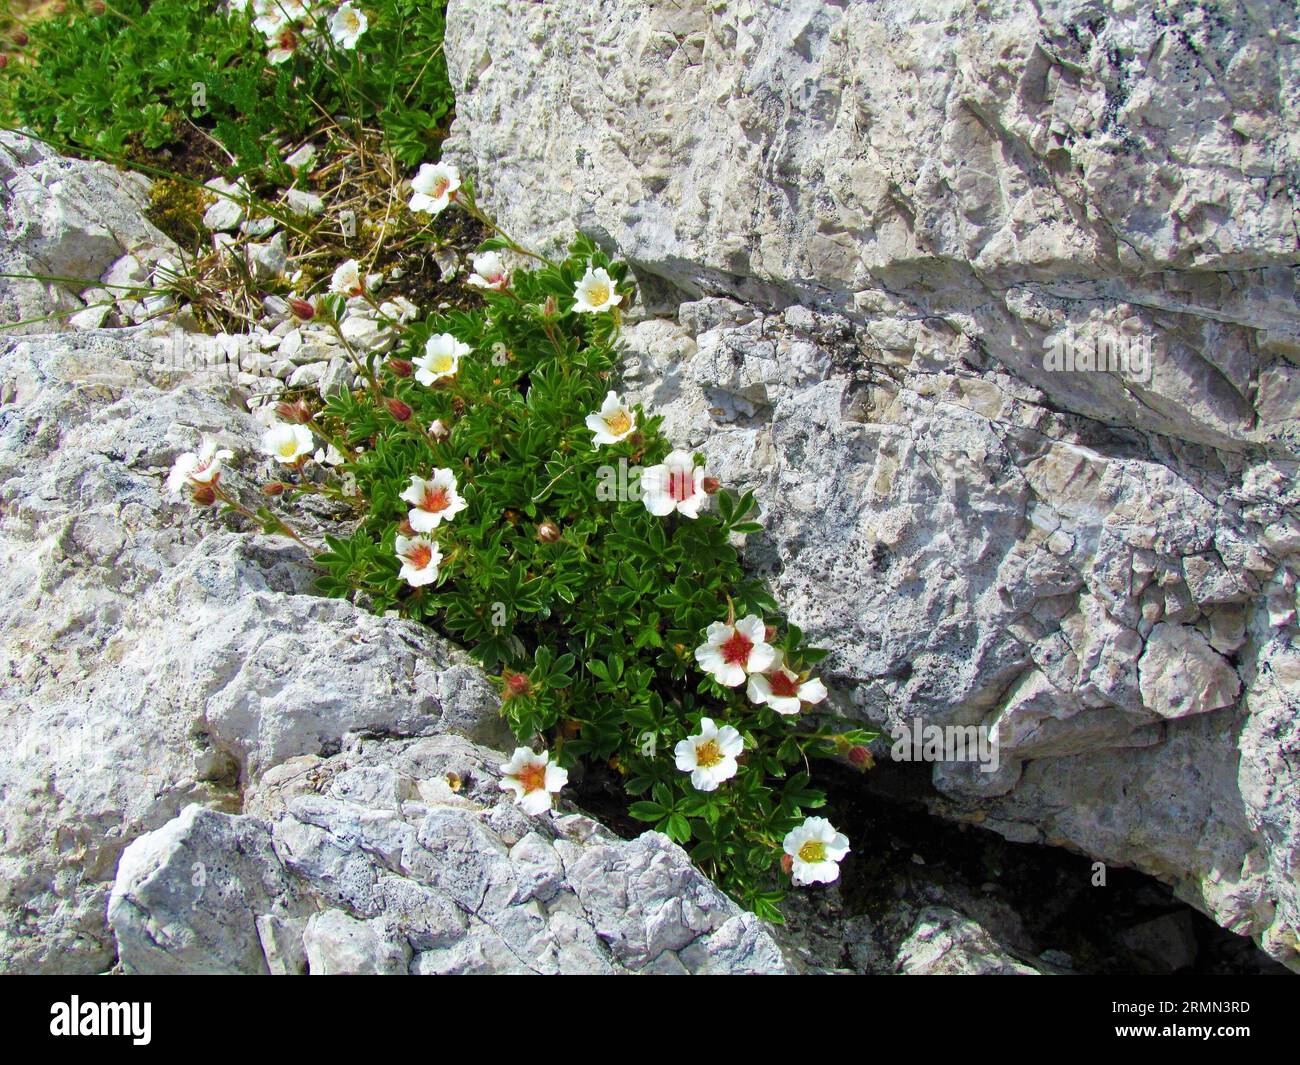 Close up of white blooming Saxifraga burseriana flowers growing in a small crevice in the rocks Stock Photo